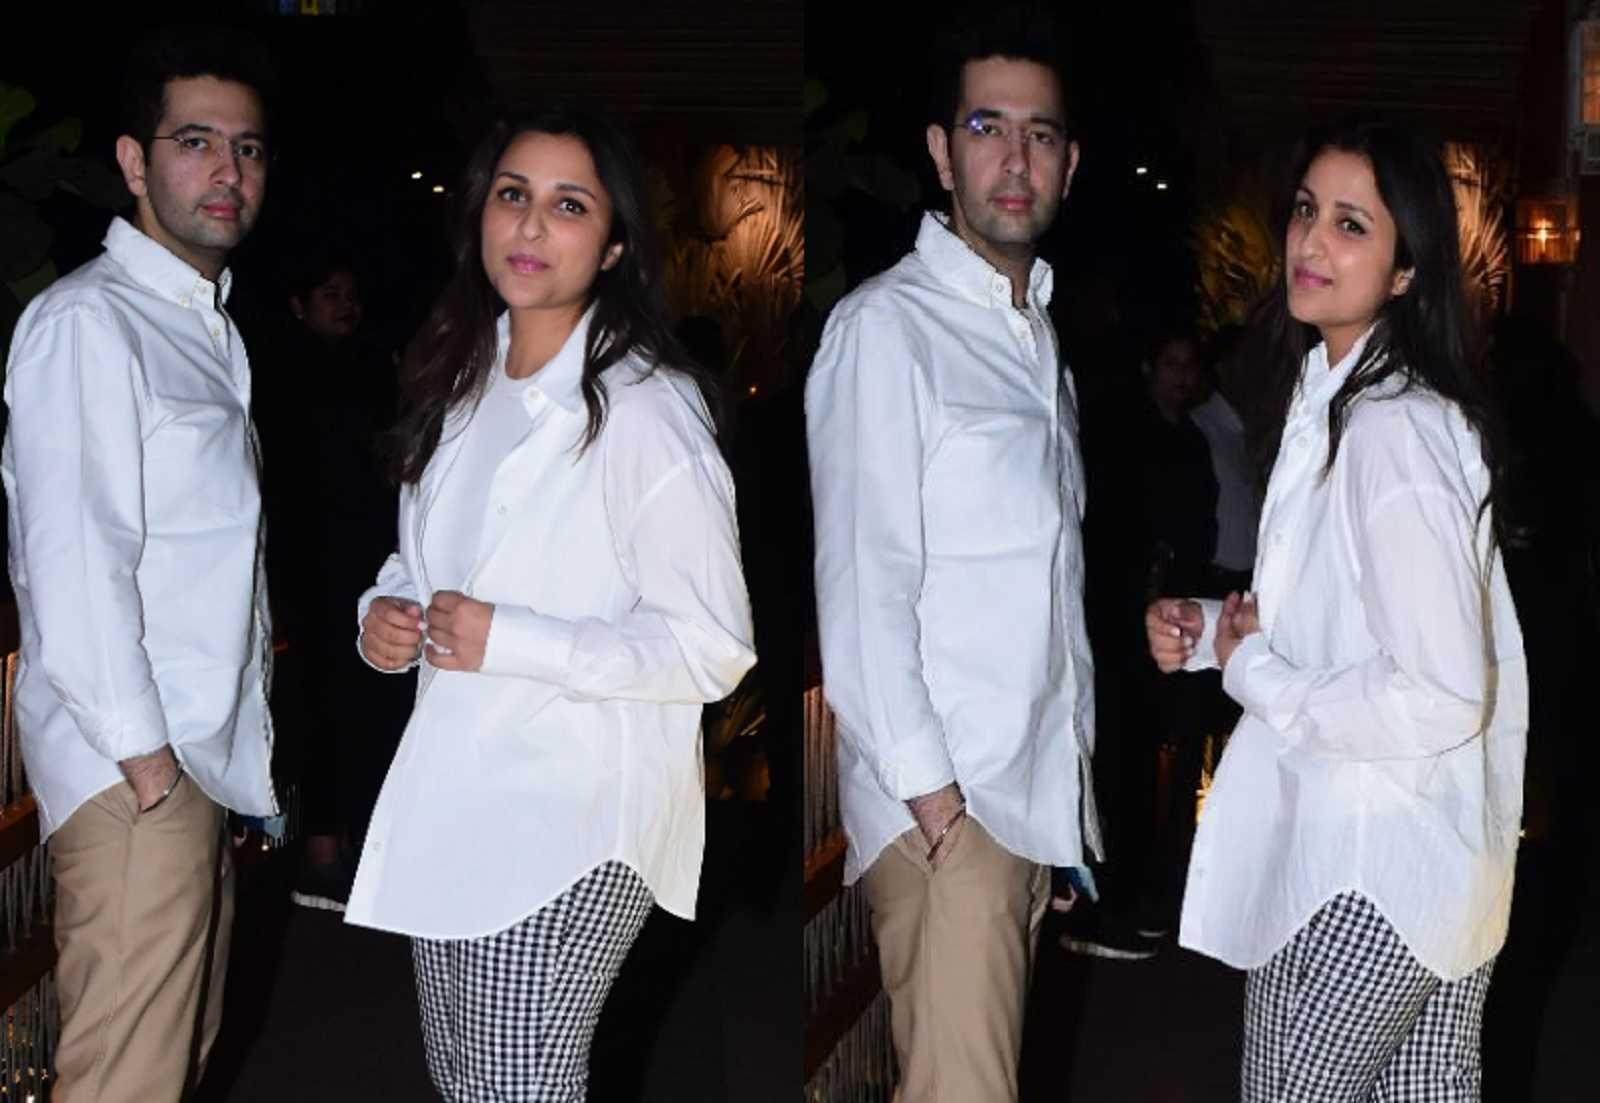 Is something brewing between Parineeti Chopra and AAP leader Raghav Chadha? duo spotted twinning in white for a dinner date